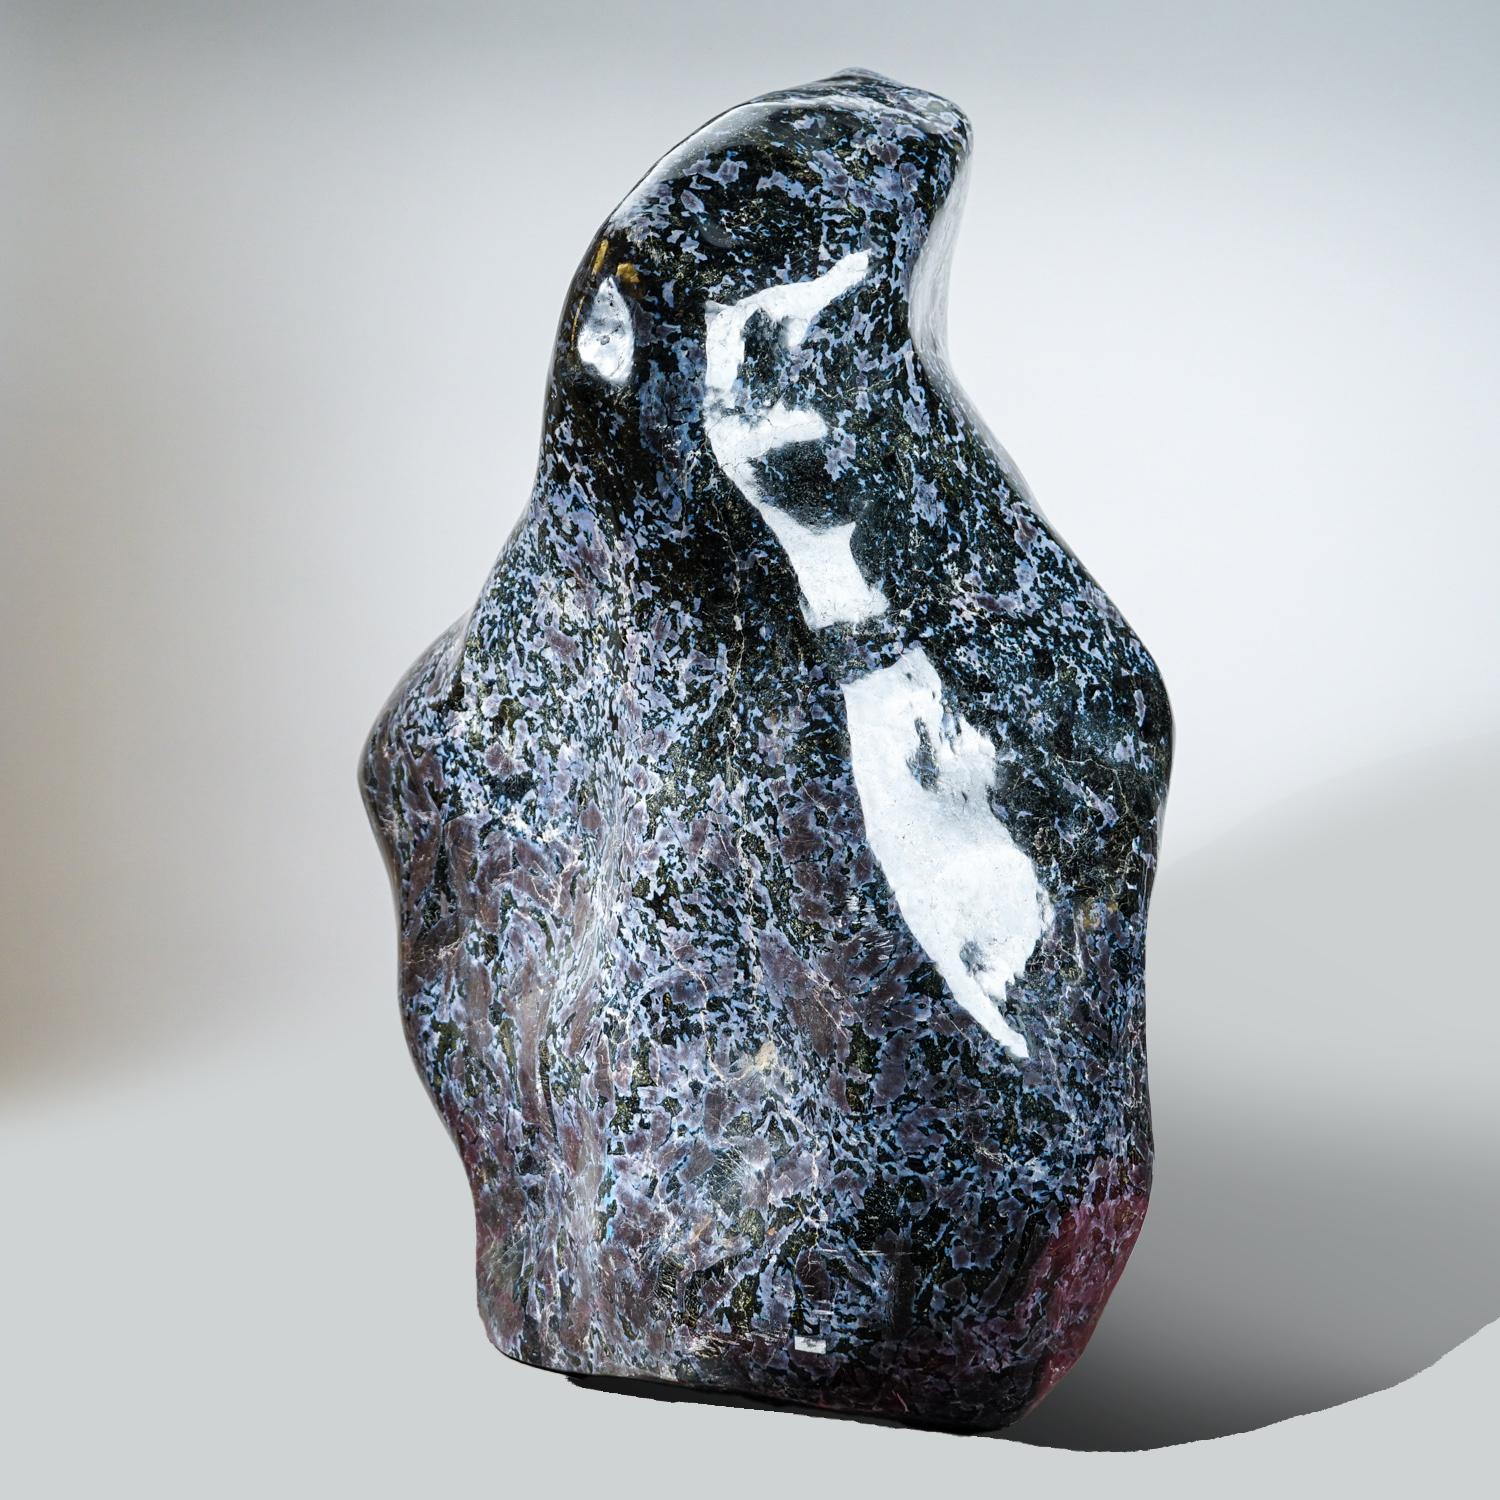 This extraordinary piece of solid, Mystic Merlinite, also known as Indigo Gabbro weighs approximately 300 lbs. It is composed of feldspar, quartz, igneous rock, and other minerals, creating an extremely unique pattern. Its modern shape and size